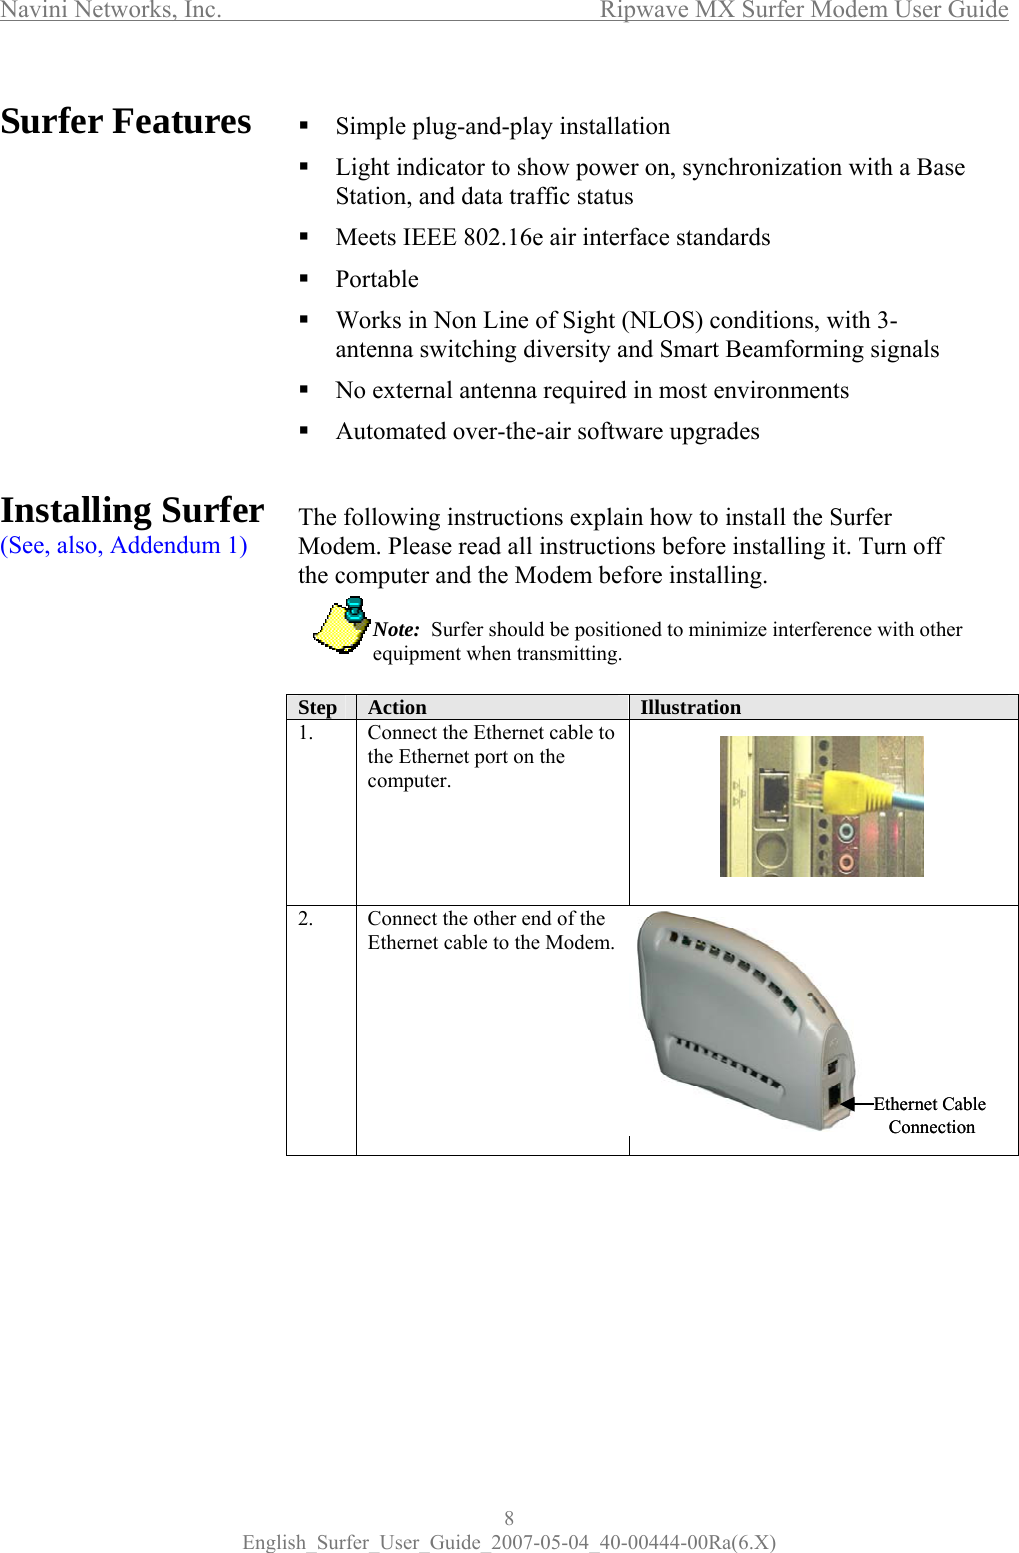 Navini Networks, Inc.           Ripwave MX Surfer Modem User Guide 8 English_Surfer_User_Guide_2007-05-04_40-00444-00Ra(6.X) Surfer Features             Installing Surfer (See, also, Addendum 1)             Simple plug-and-play installation  Light indicator to show power on, synchronization with a Base Station, and data traffic status  Meets IEEE 802.16e air interface standards  Portable  Works in Non Line of Sight (NLOS) conditions, with 3-antenna switching diversity and Smart Beamforming signals   No external antenna required in most environments  Automated over-the-air software upgrades   The following instructions explain how to install the Surfer Modem. Please read all instructions before installing it. Turn off the computer and the Modem before installing.             Note:  Surfer should be positioned to minimize interference with other   equipment when transmitting.  Step  Action  Illustration  1.  Connect the Ethernet cable to the Ethernet port on the computer.  2.  Connect the other end of the Ethernet cable to the Modem.         Ethernet Cable ConnectionEthernet Cable Connection